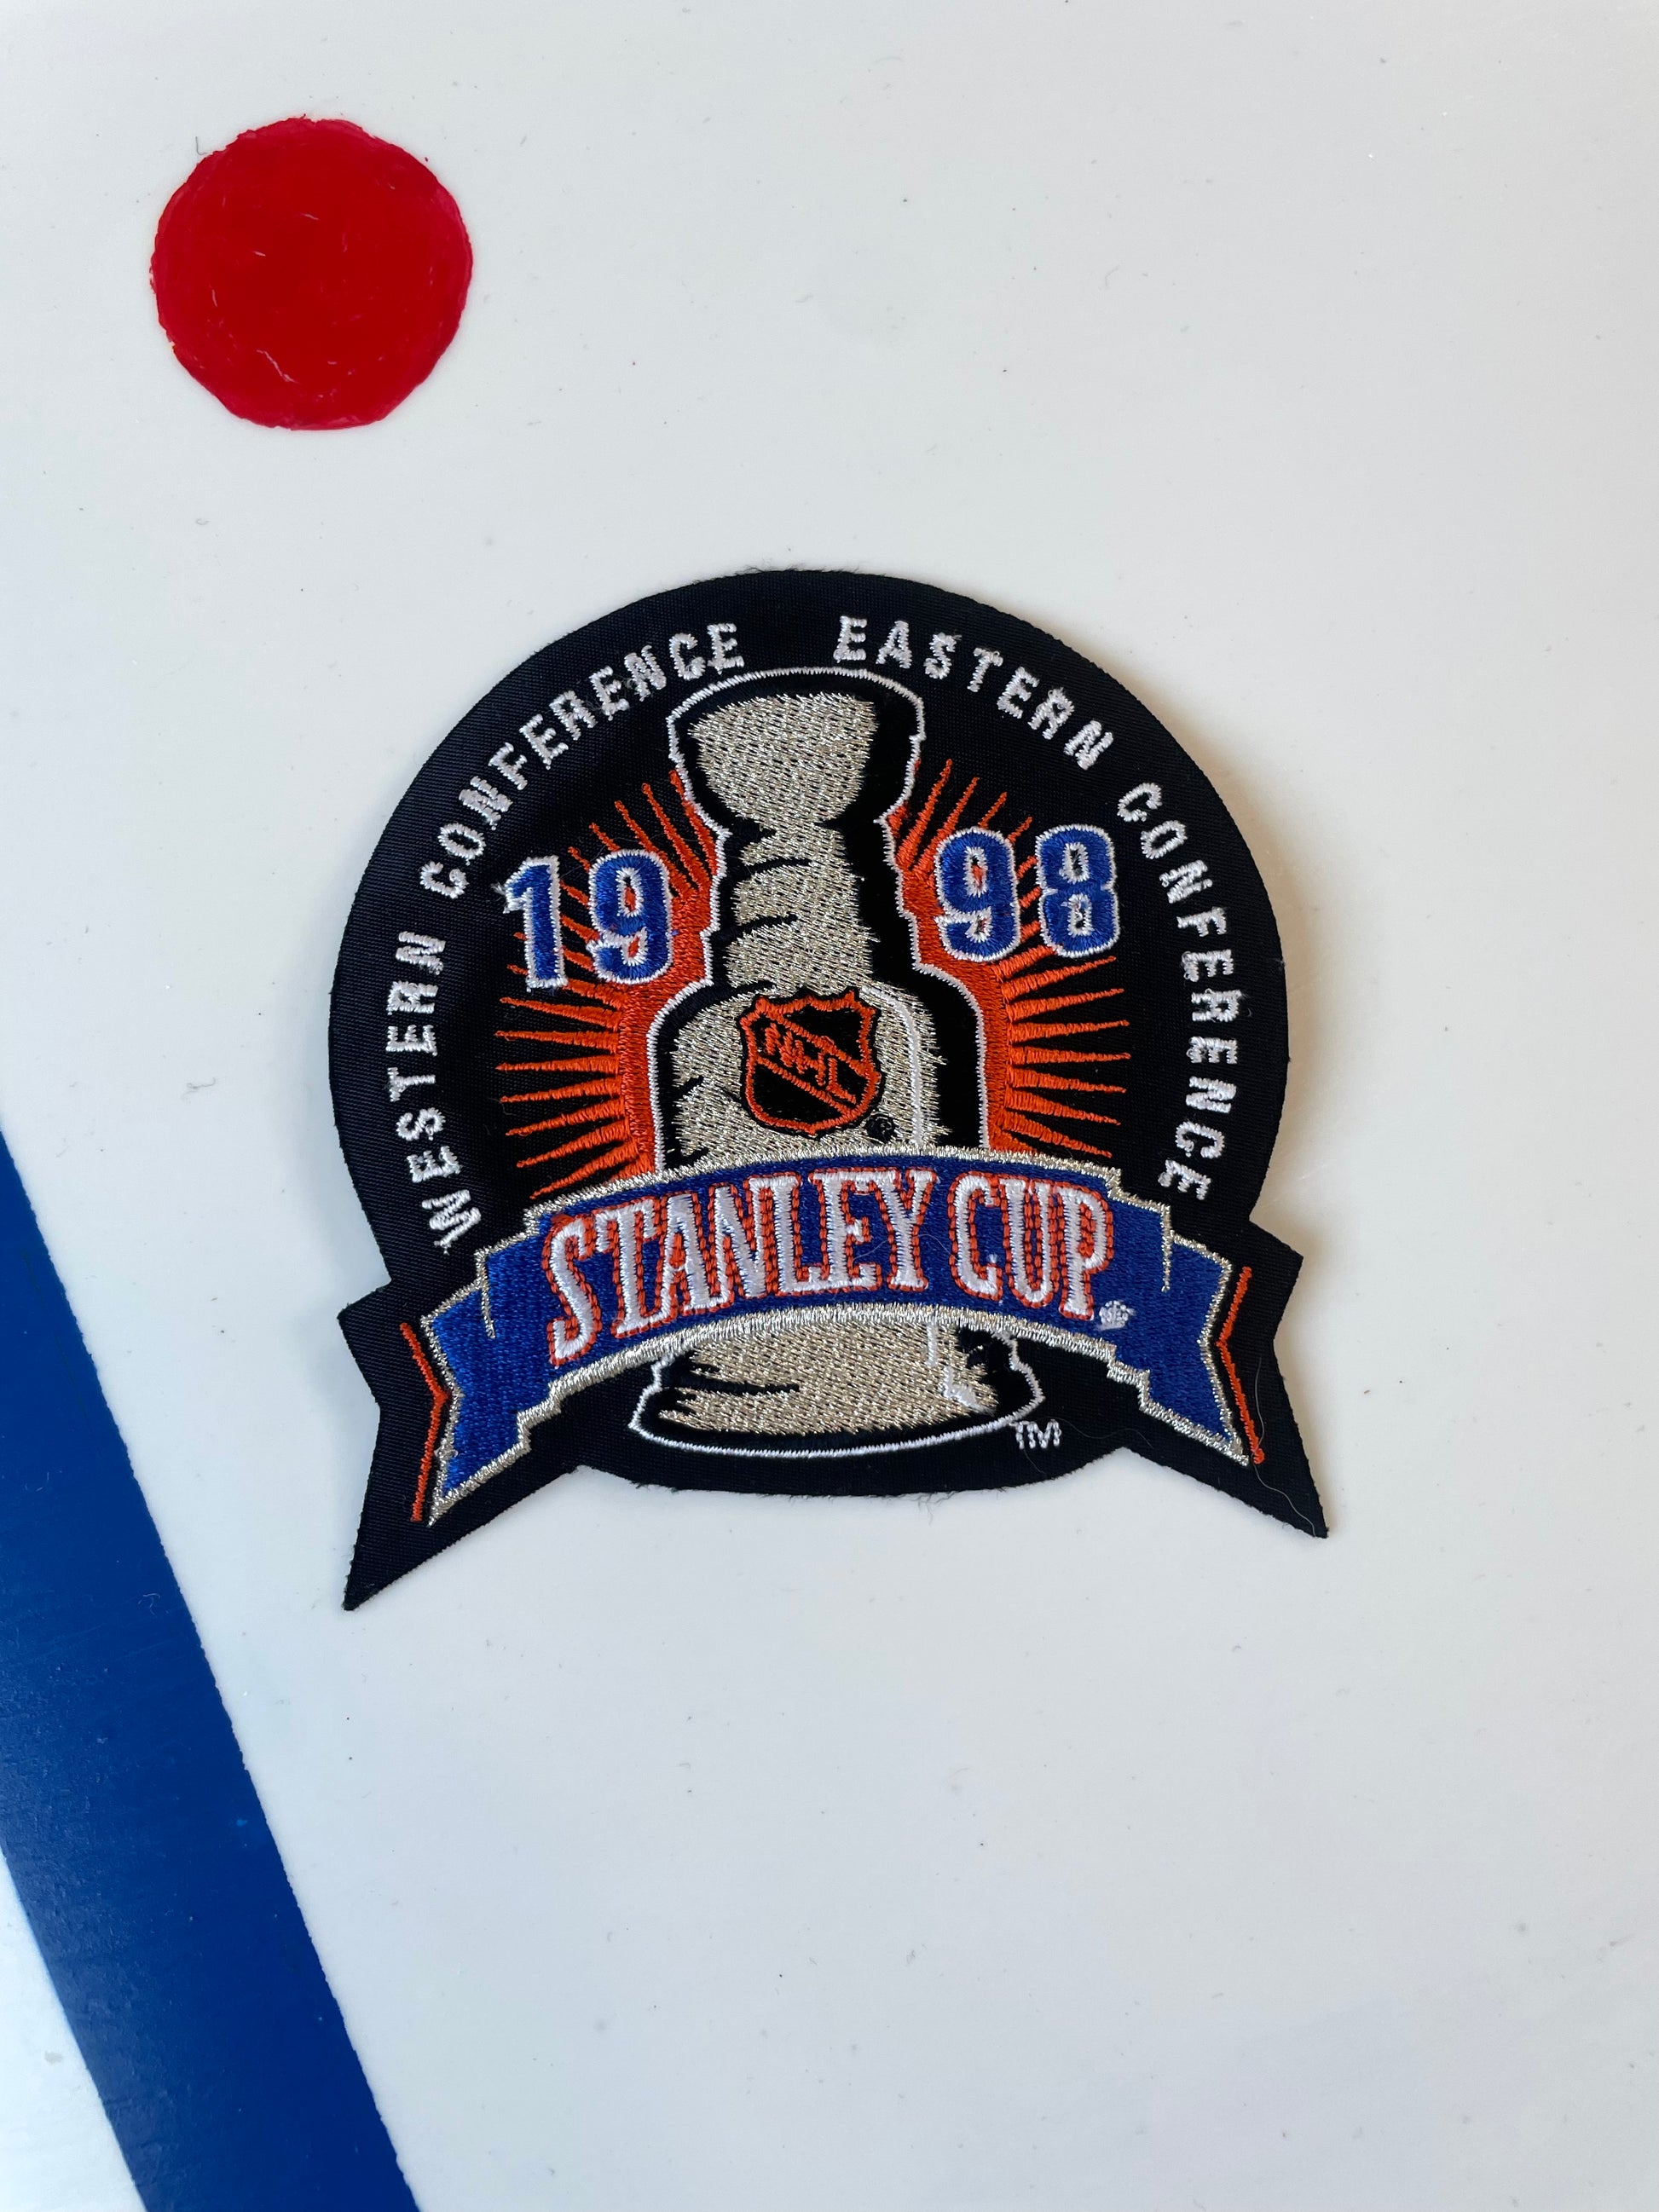 1991 Stanley Cup Finals Patch Pittsburgh Penguins vs Minnesota North Stars